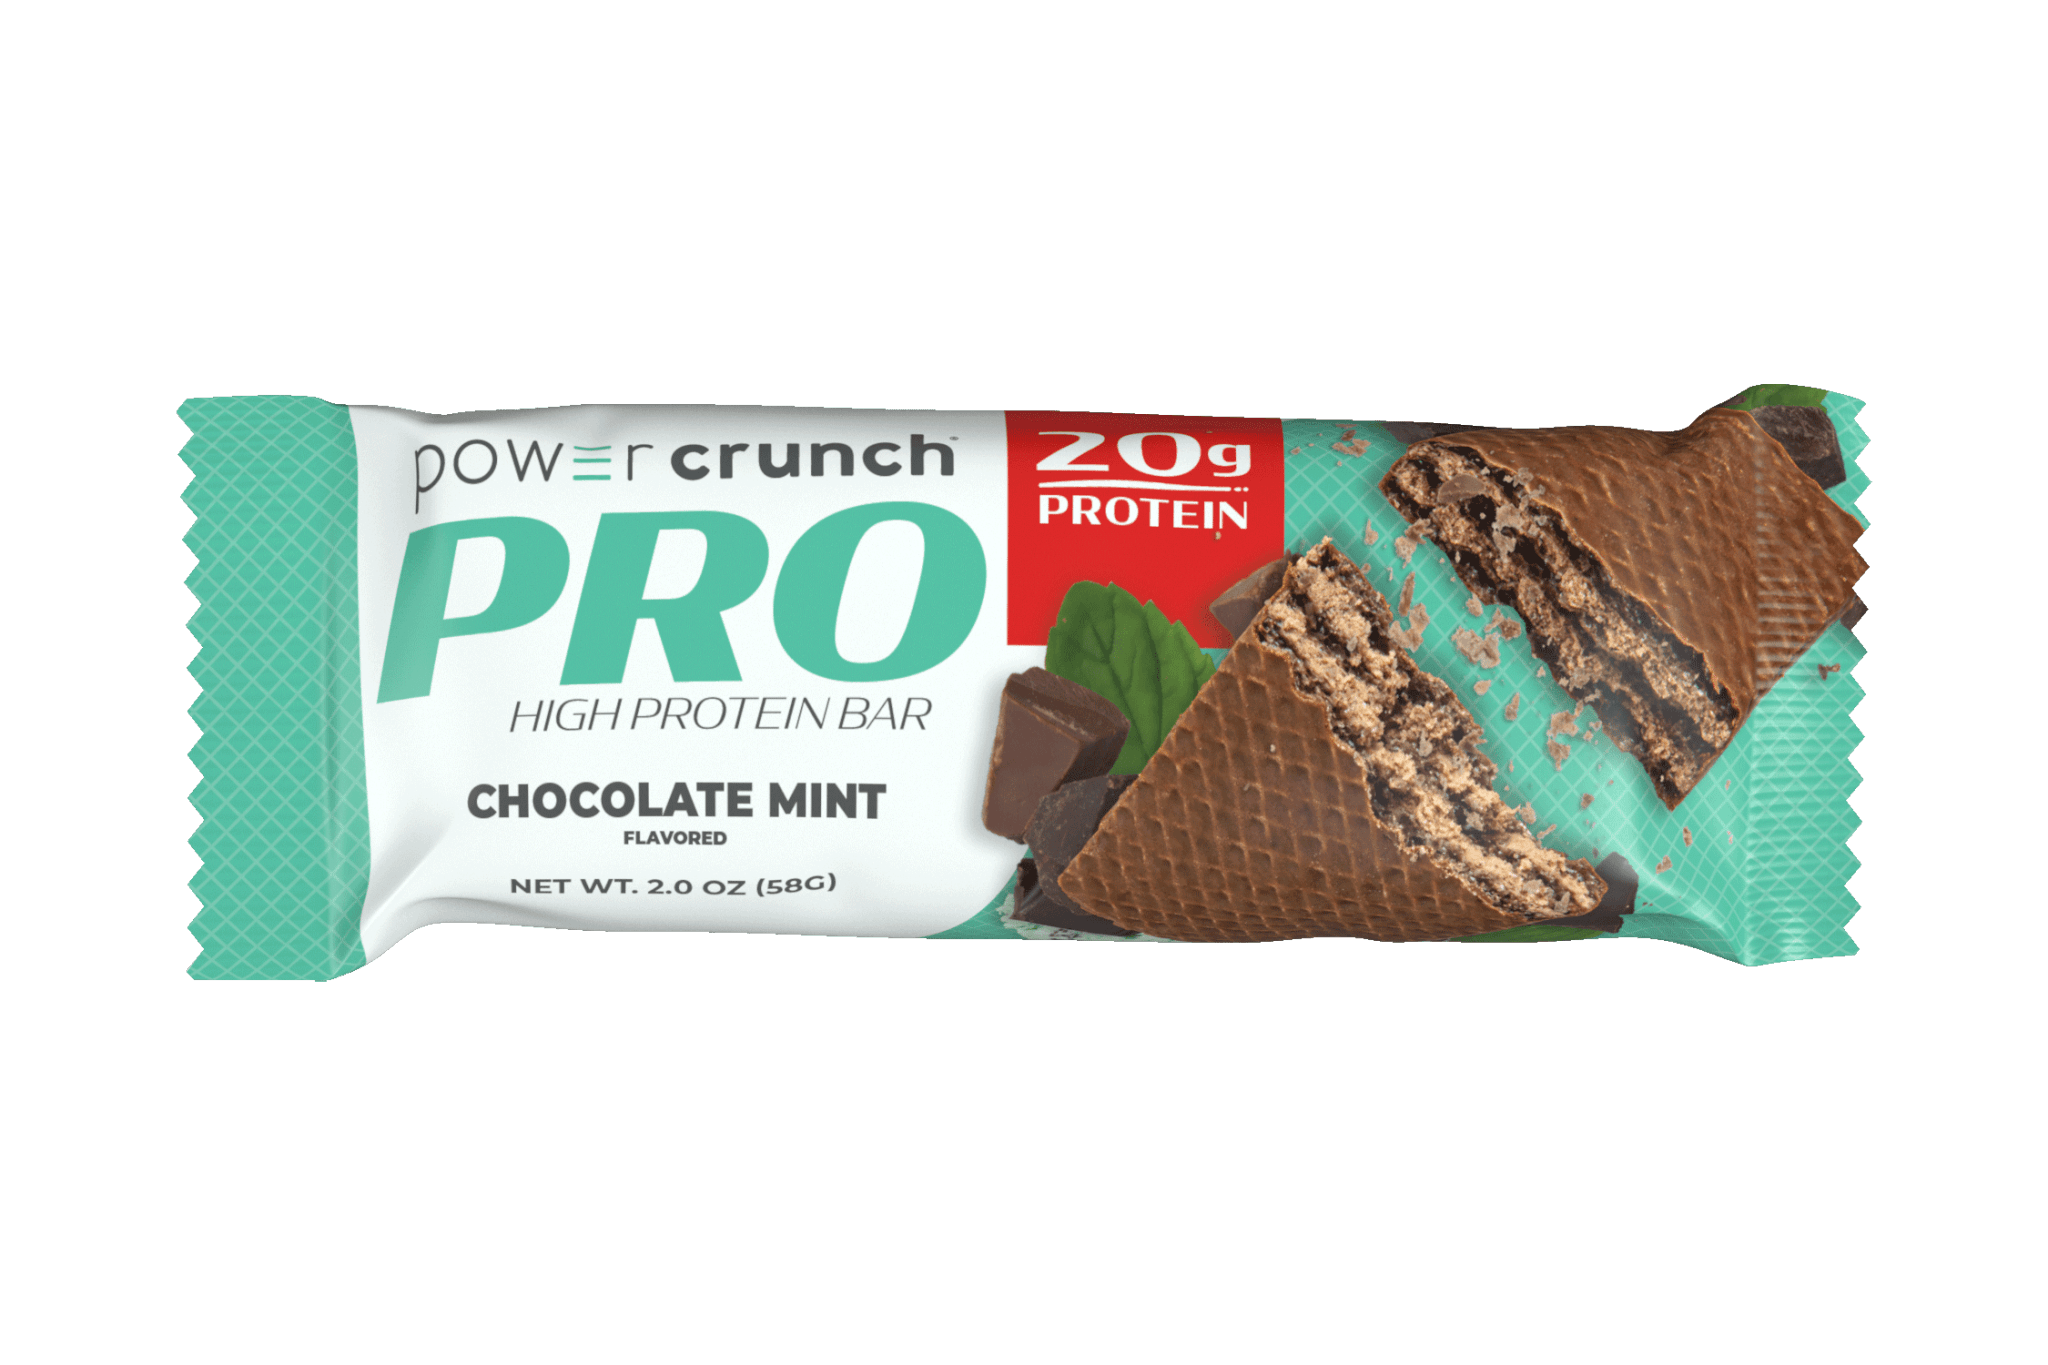 Power Crunch Chocolate Mint PRO 20g protein bars